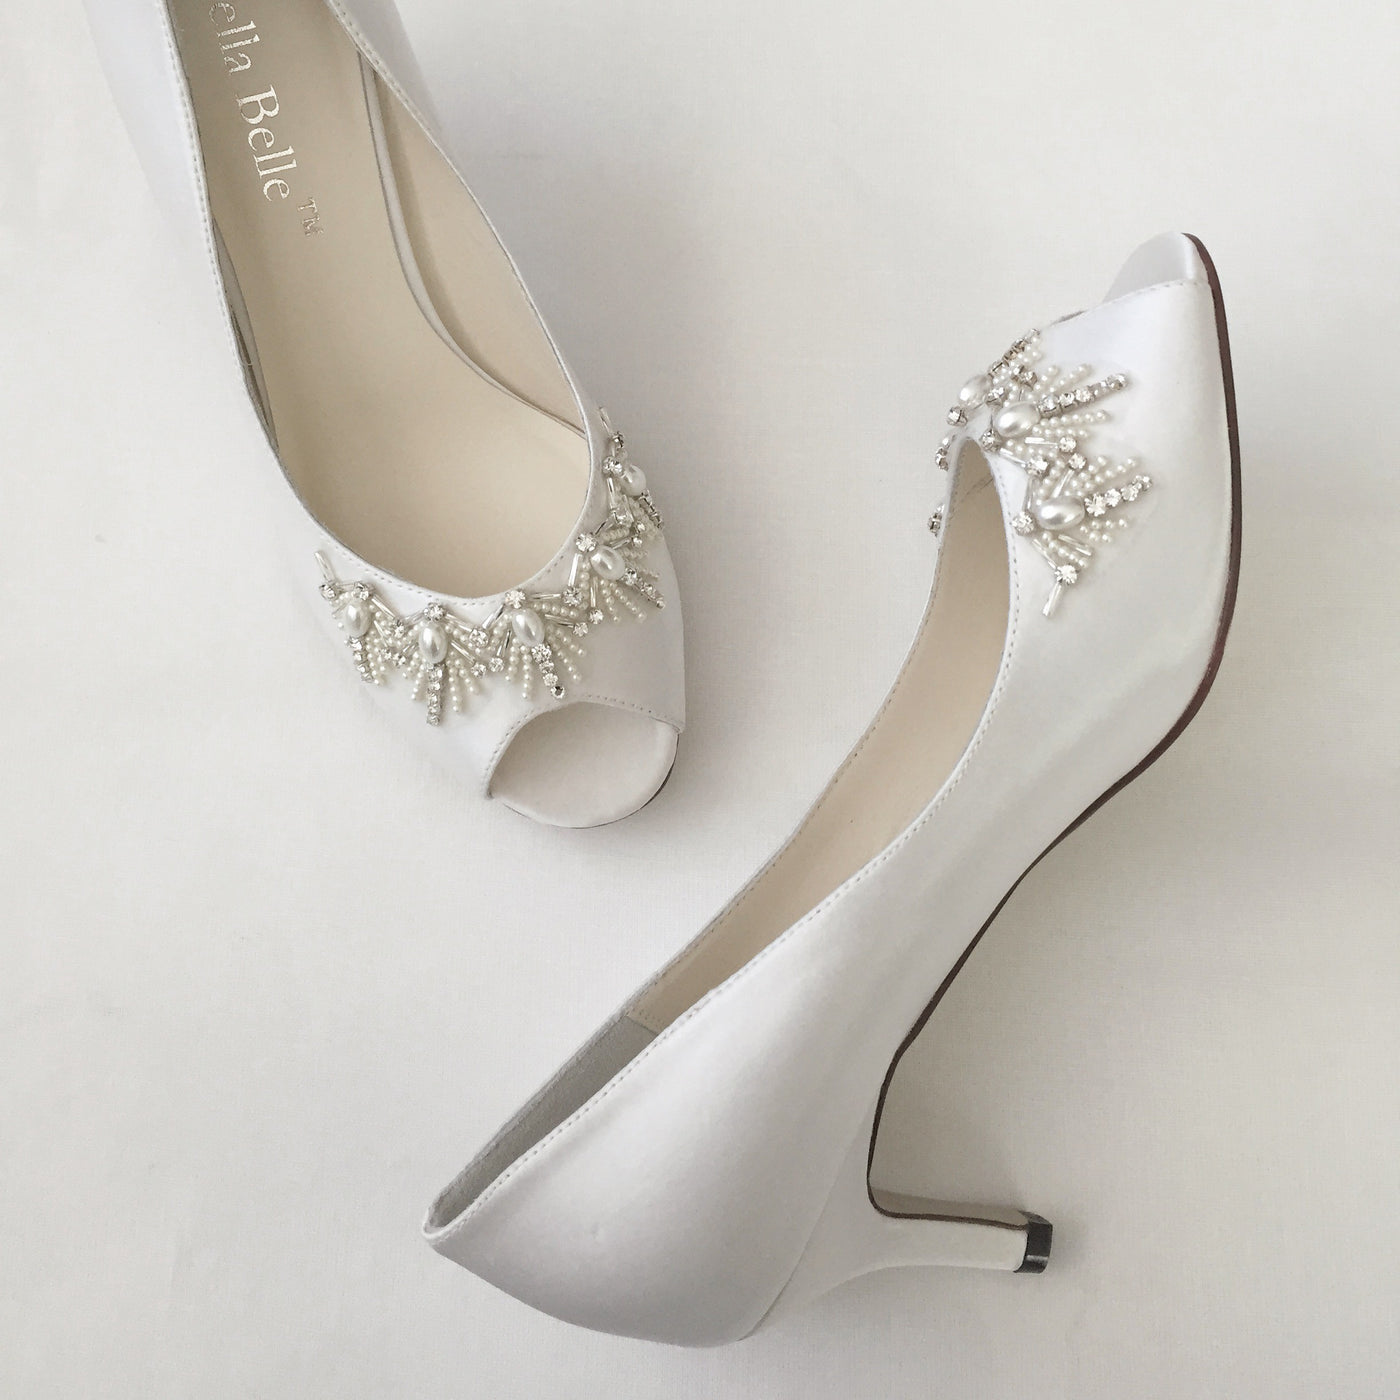 Great Gatsby Glamourous Bridal Shoes Agnes - SOLD OUT